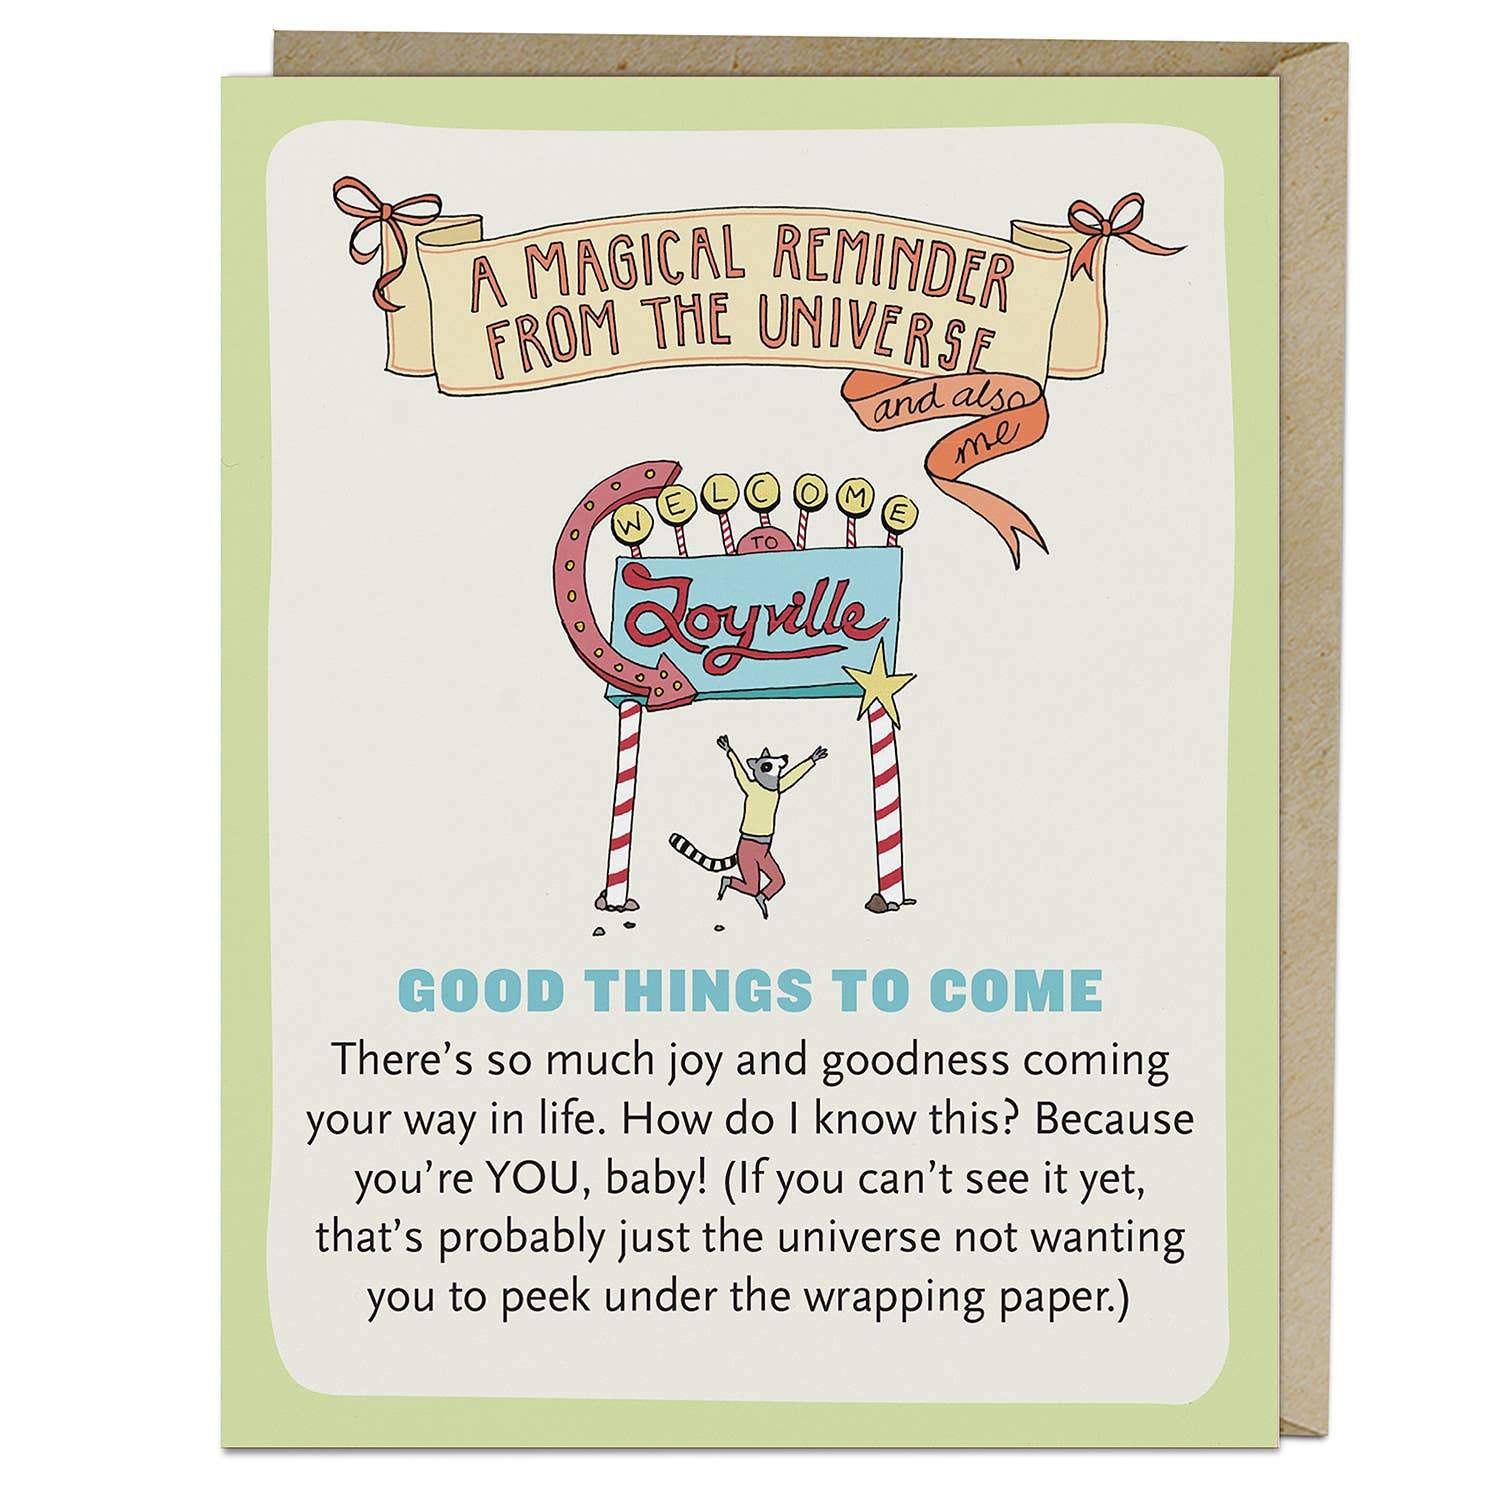 Emily McDowell & Friends - Good Things to Come Affirmators! Greeting Card